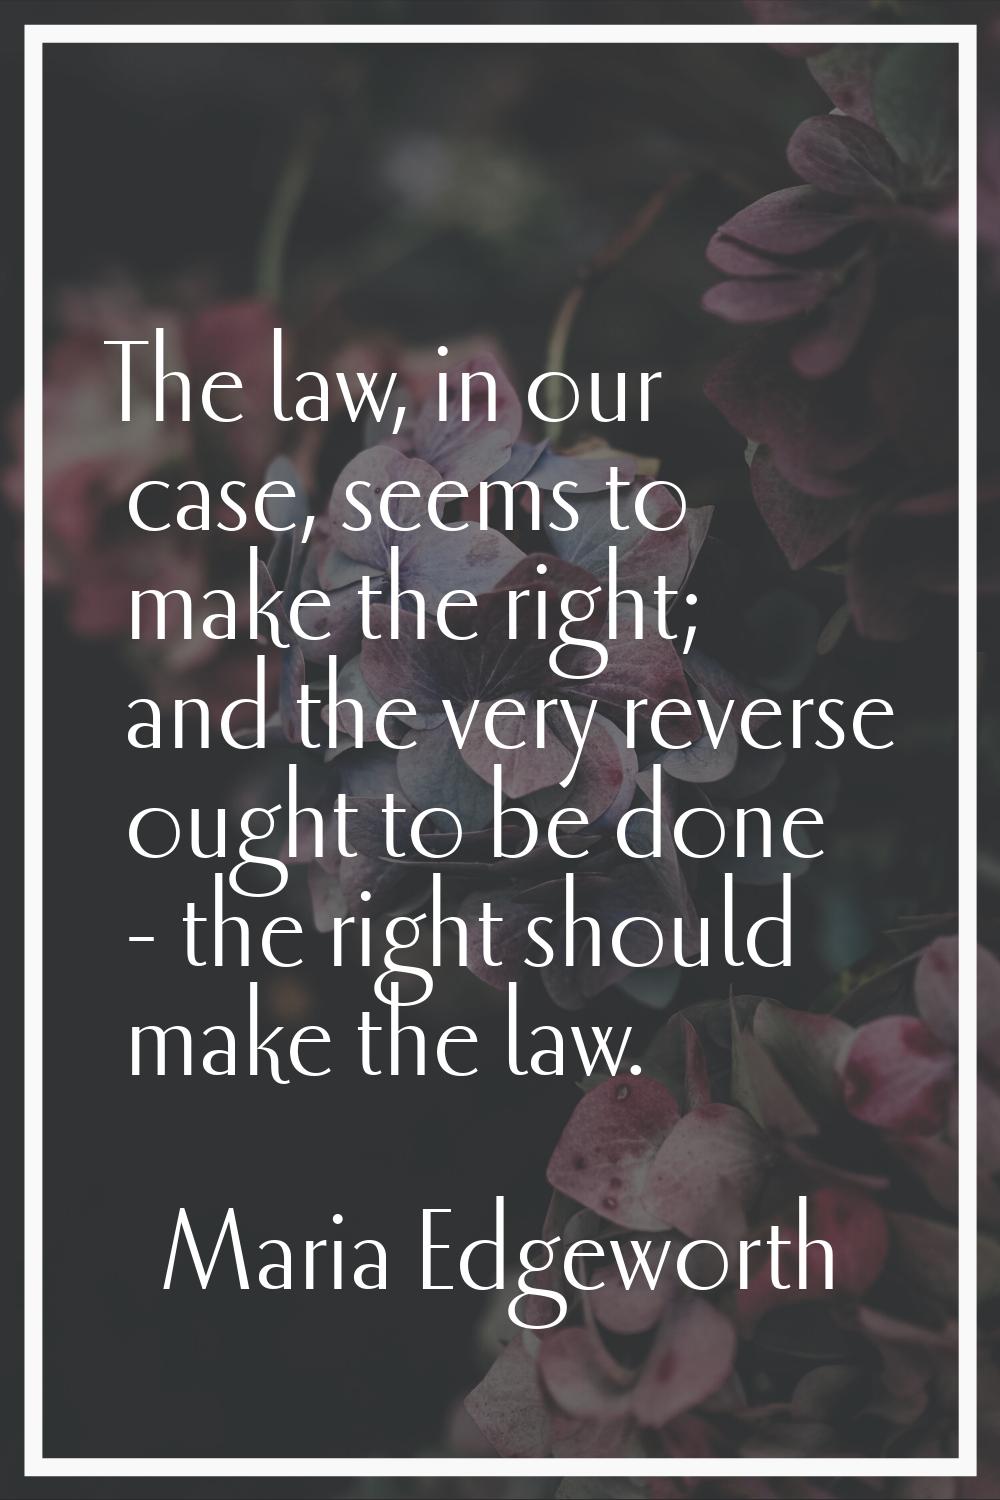 The law, in our case, seems to make the right; and the very reverse ought to be done - the right sh